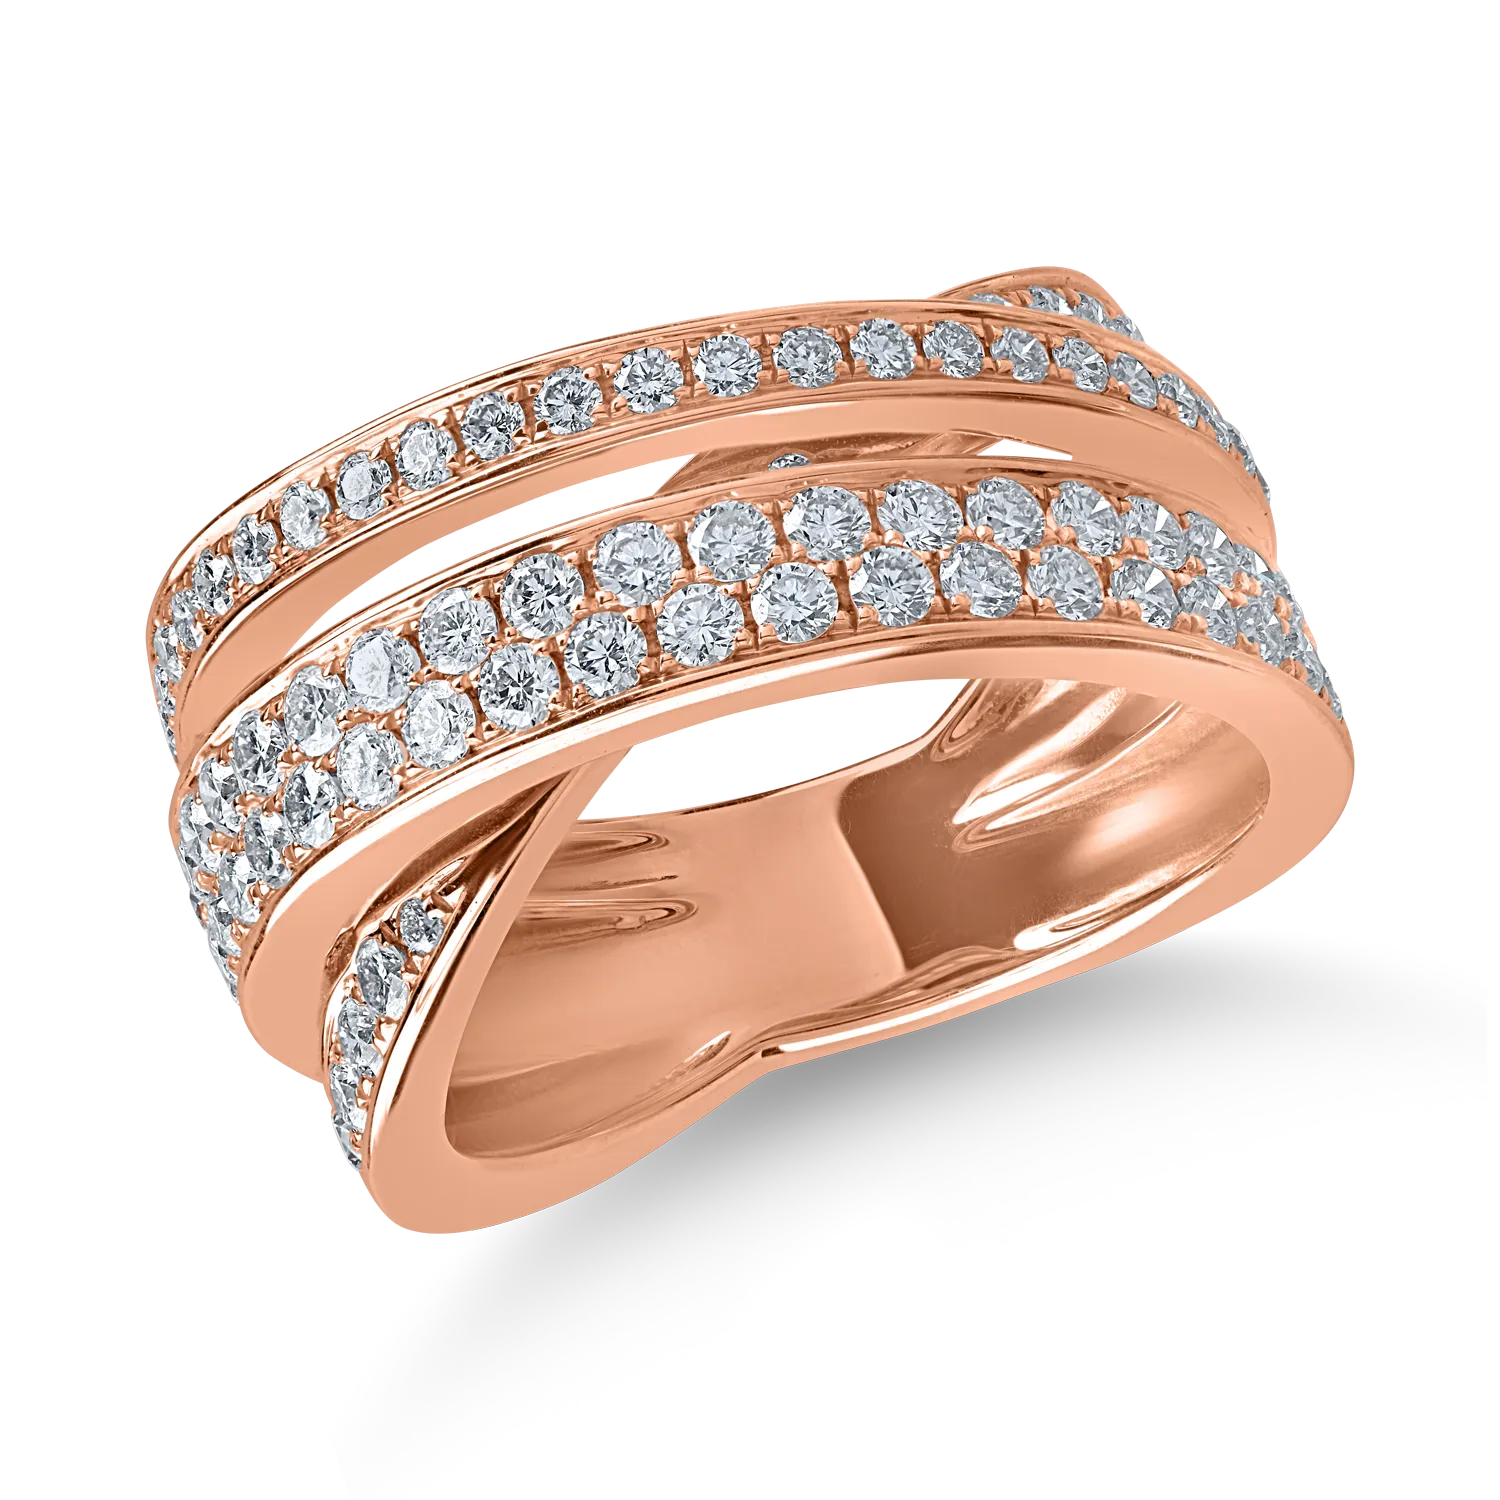 Rose gold ring with 1.2ct diamonds